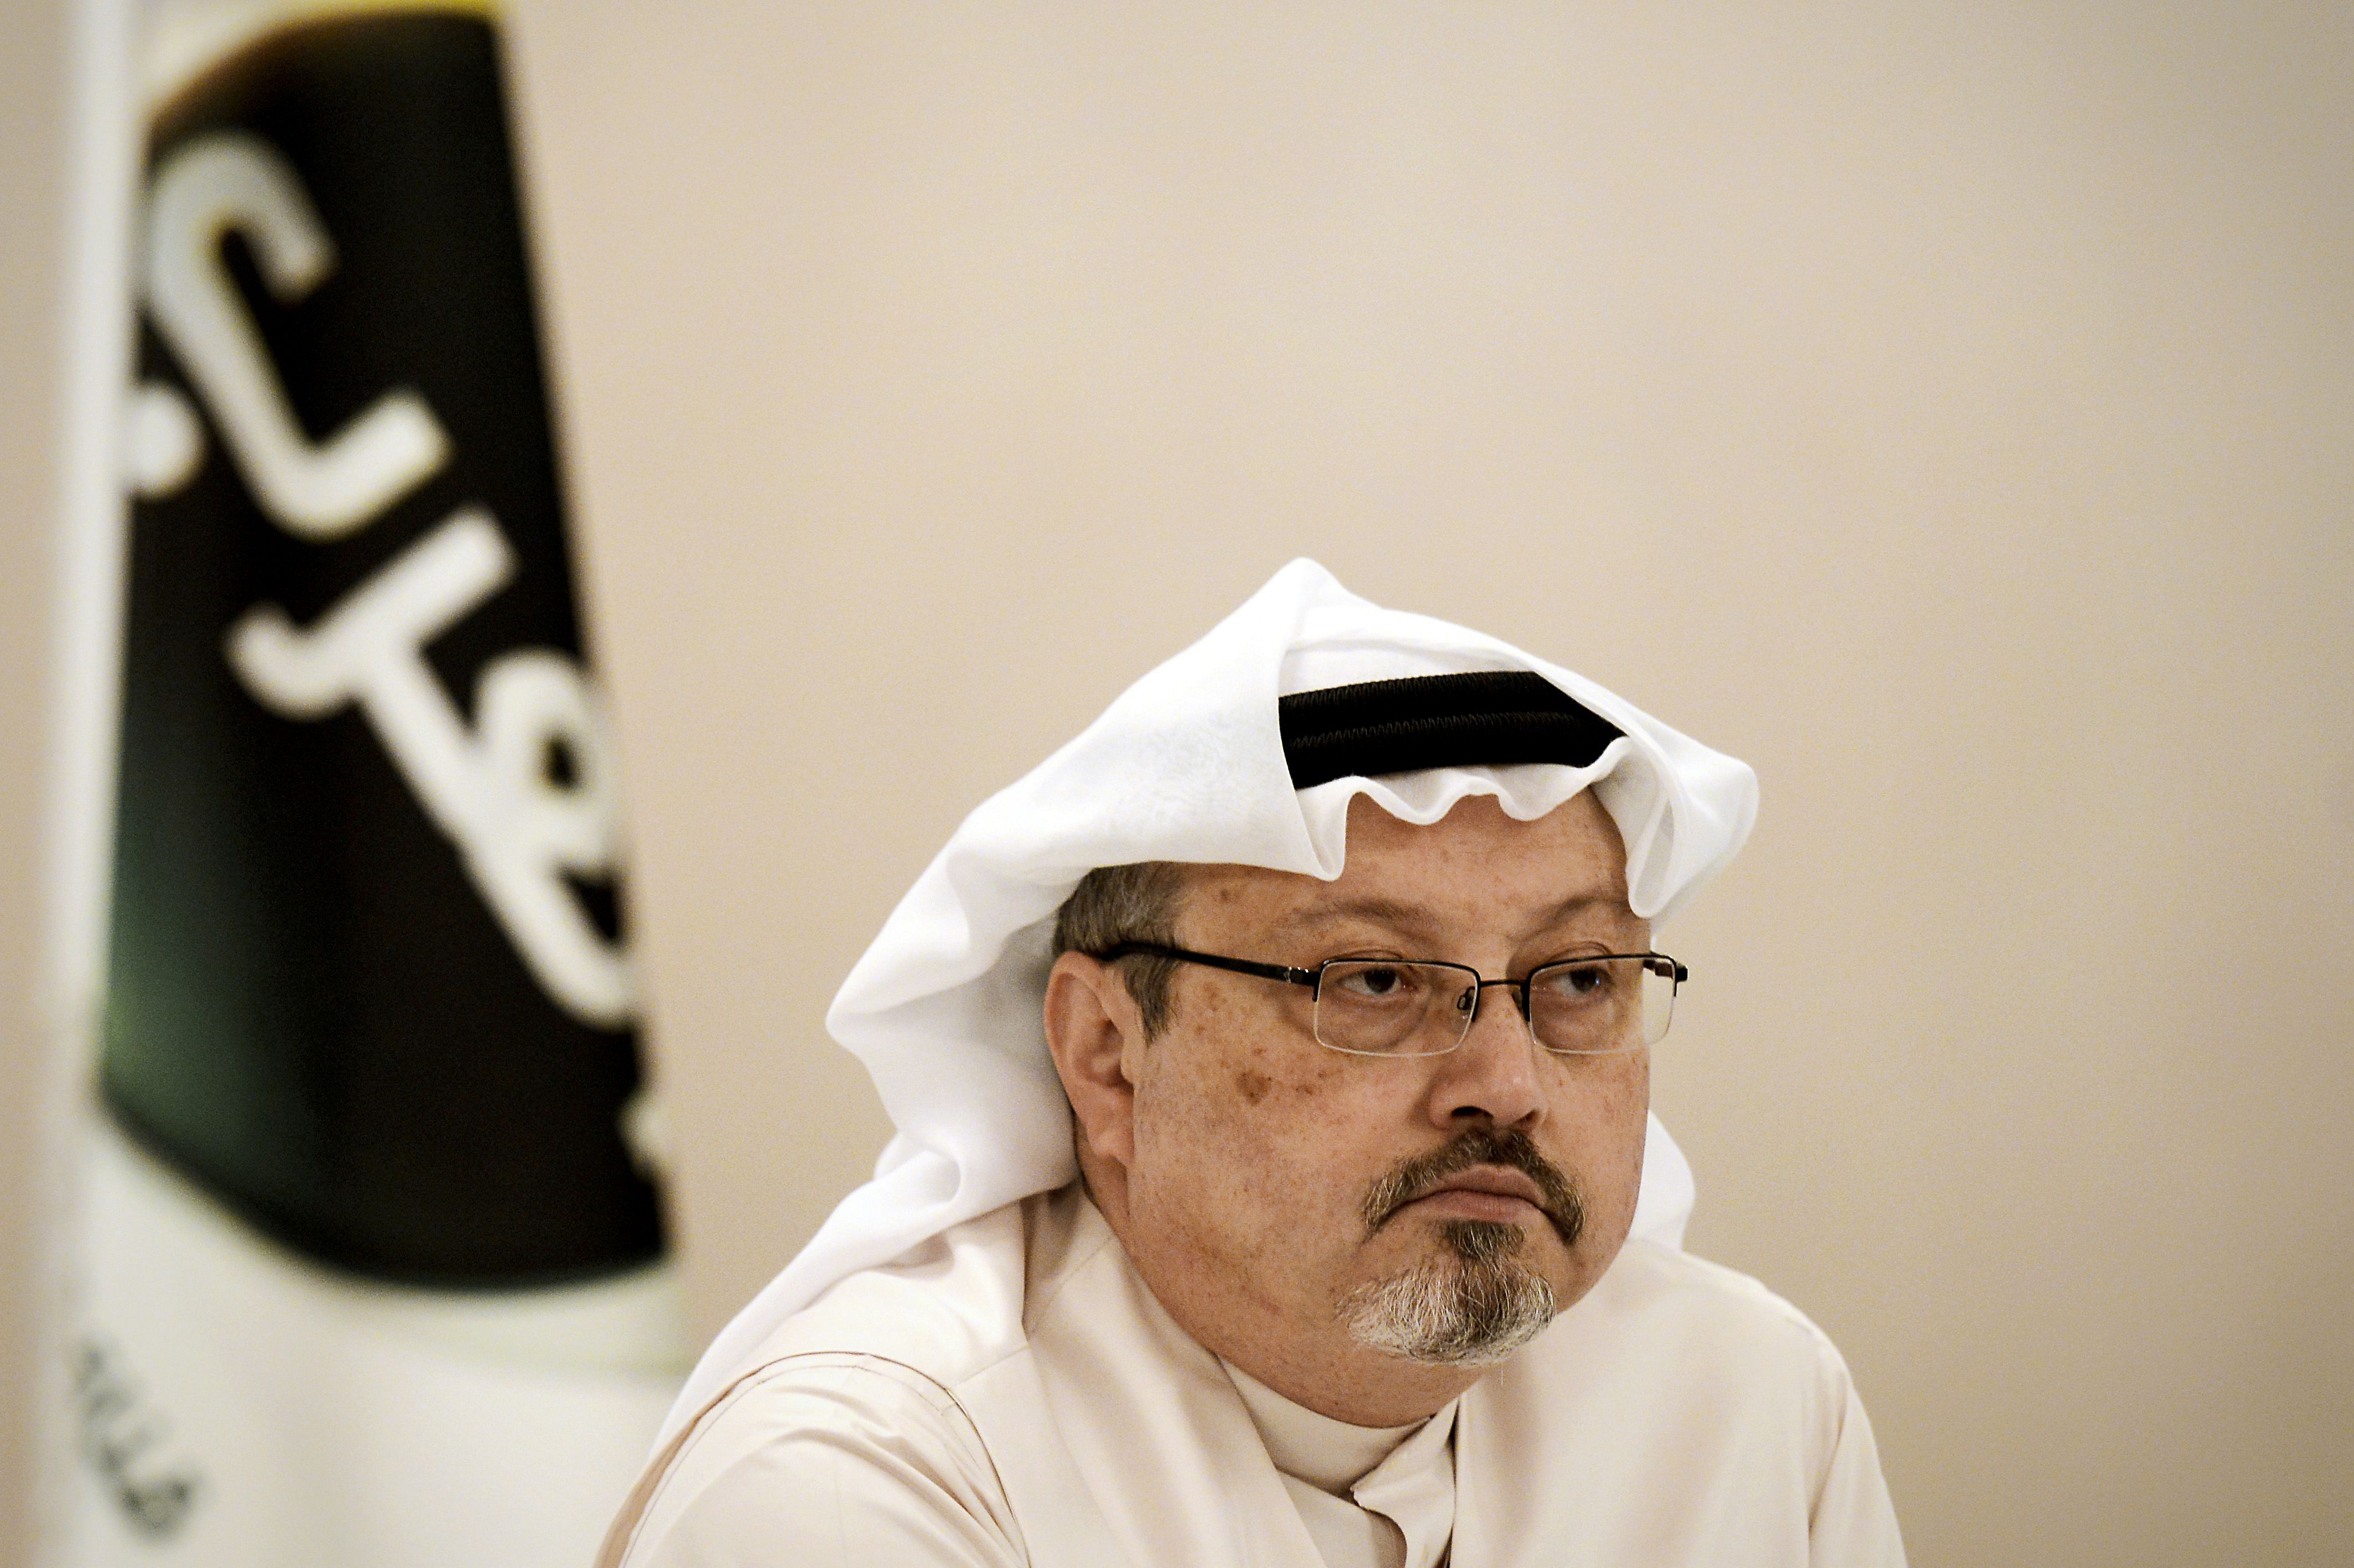 In this file photo taken on December 15, 2014 A general manager of Alarab TV, Jamal Khashoggi, looks on during a press conference in the Bahraini capital Manama. (AFP Photo)